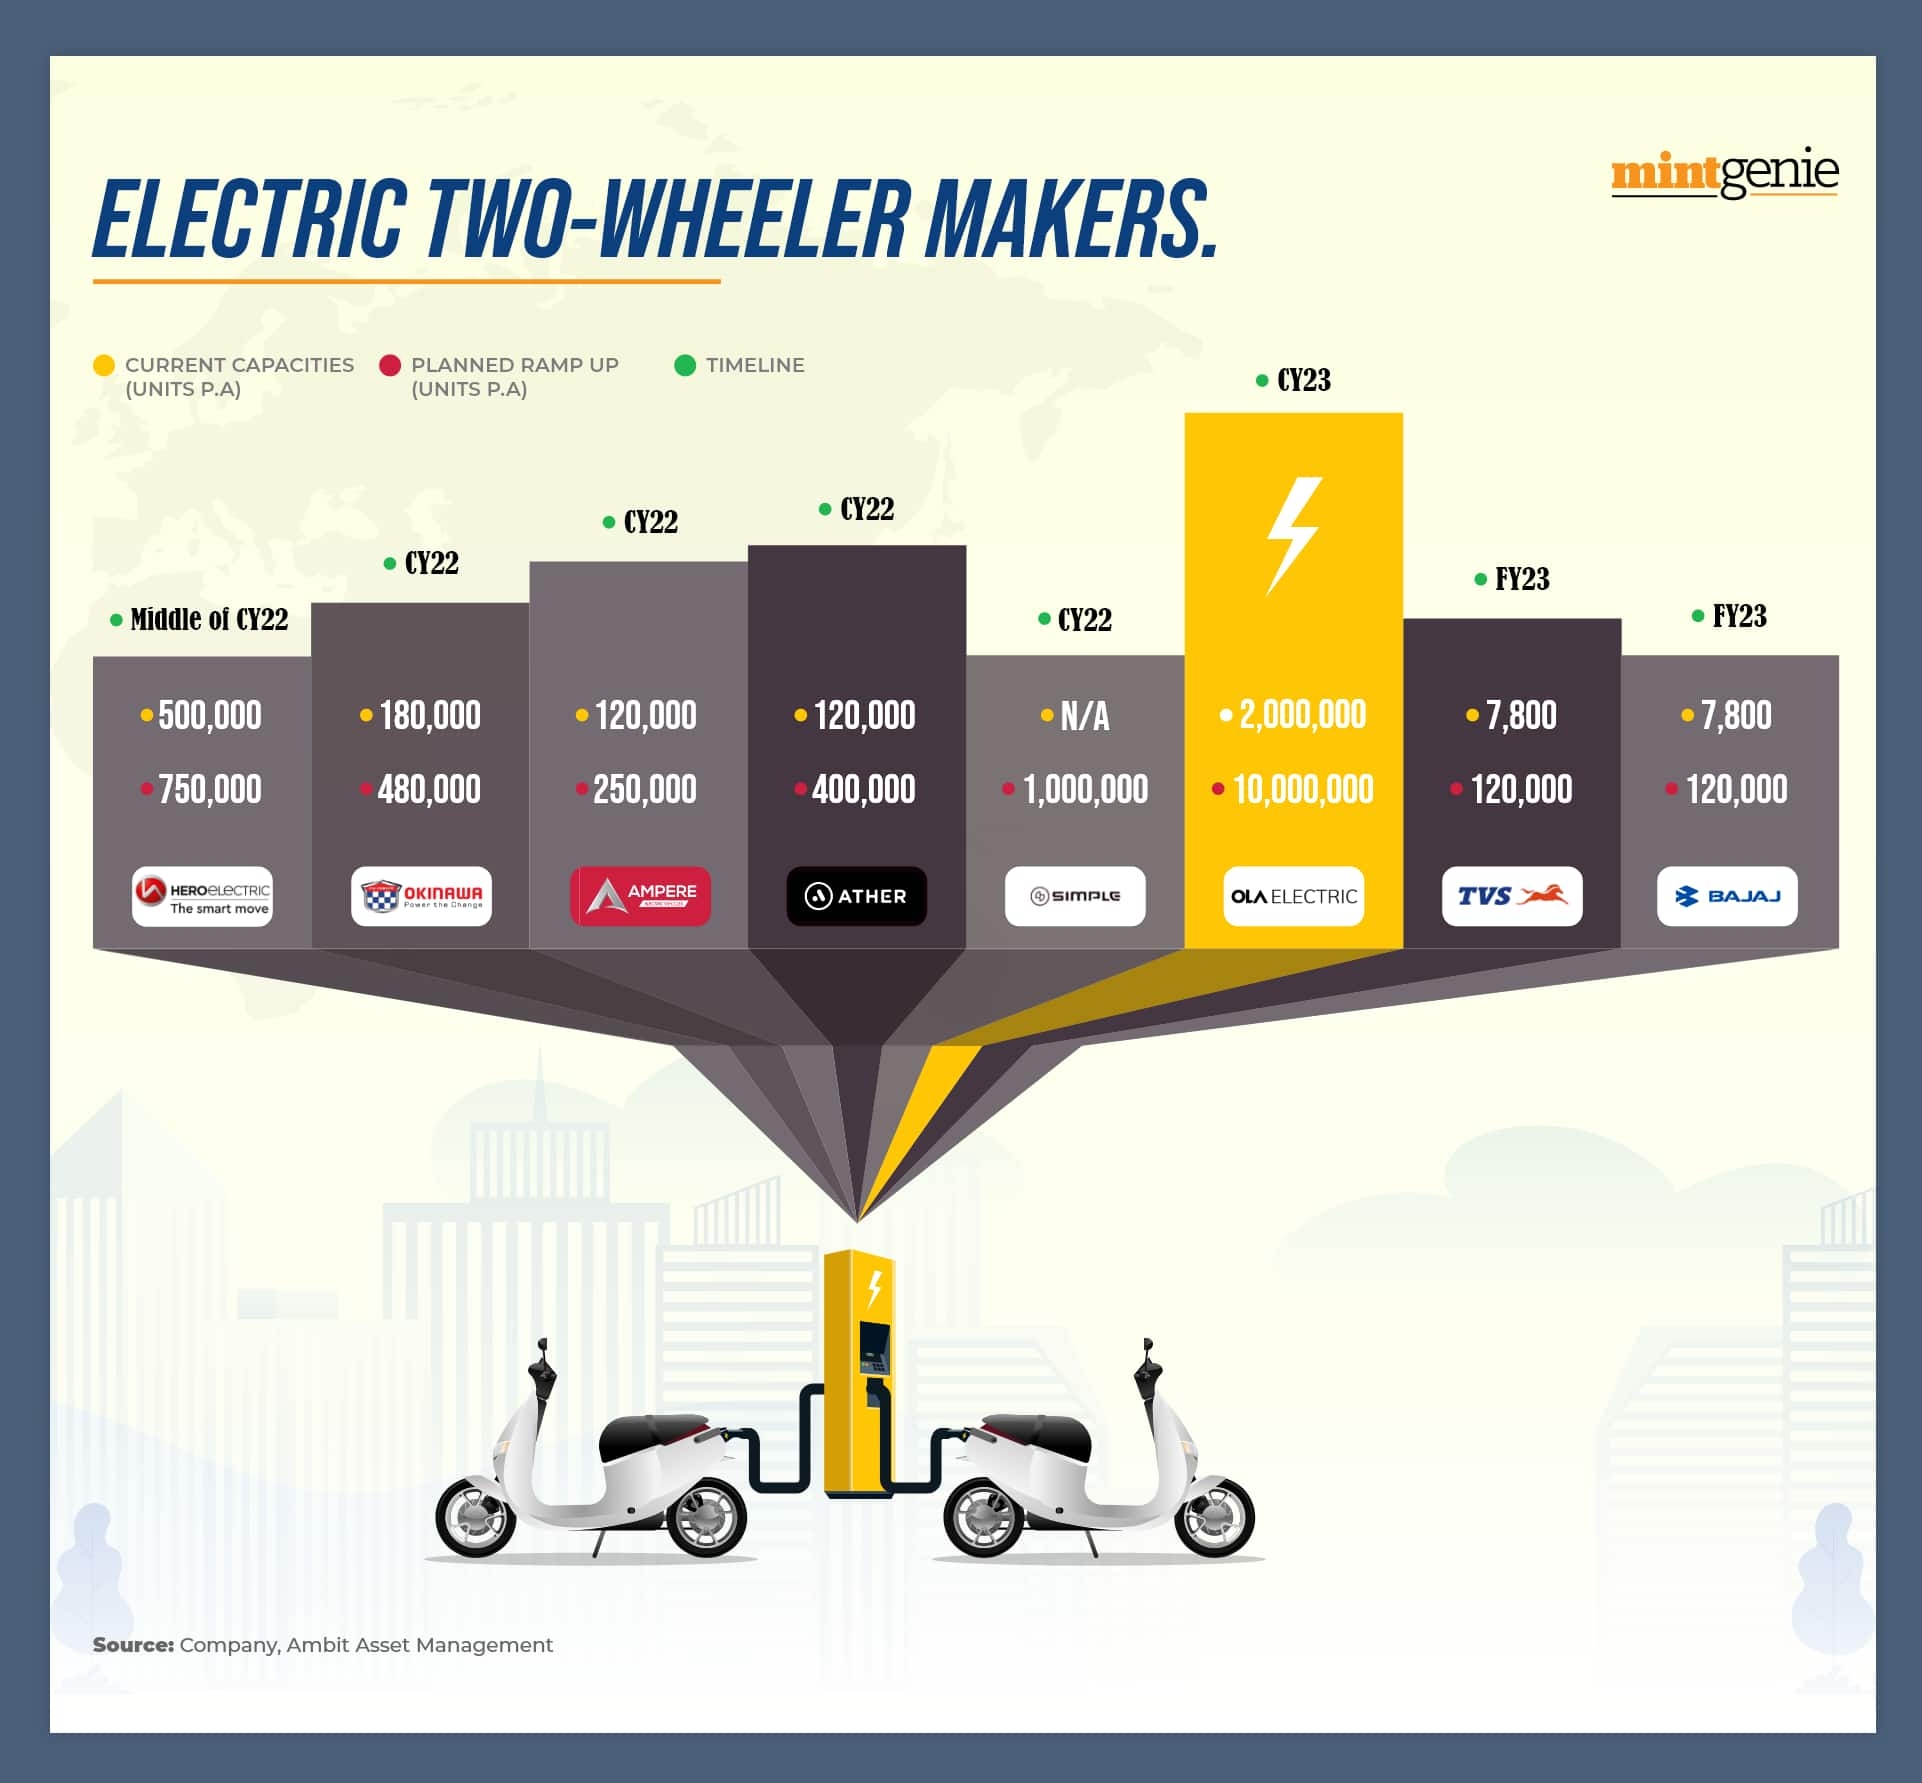 Electric two-wheeler makers